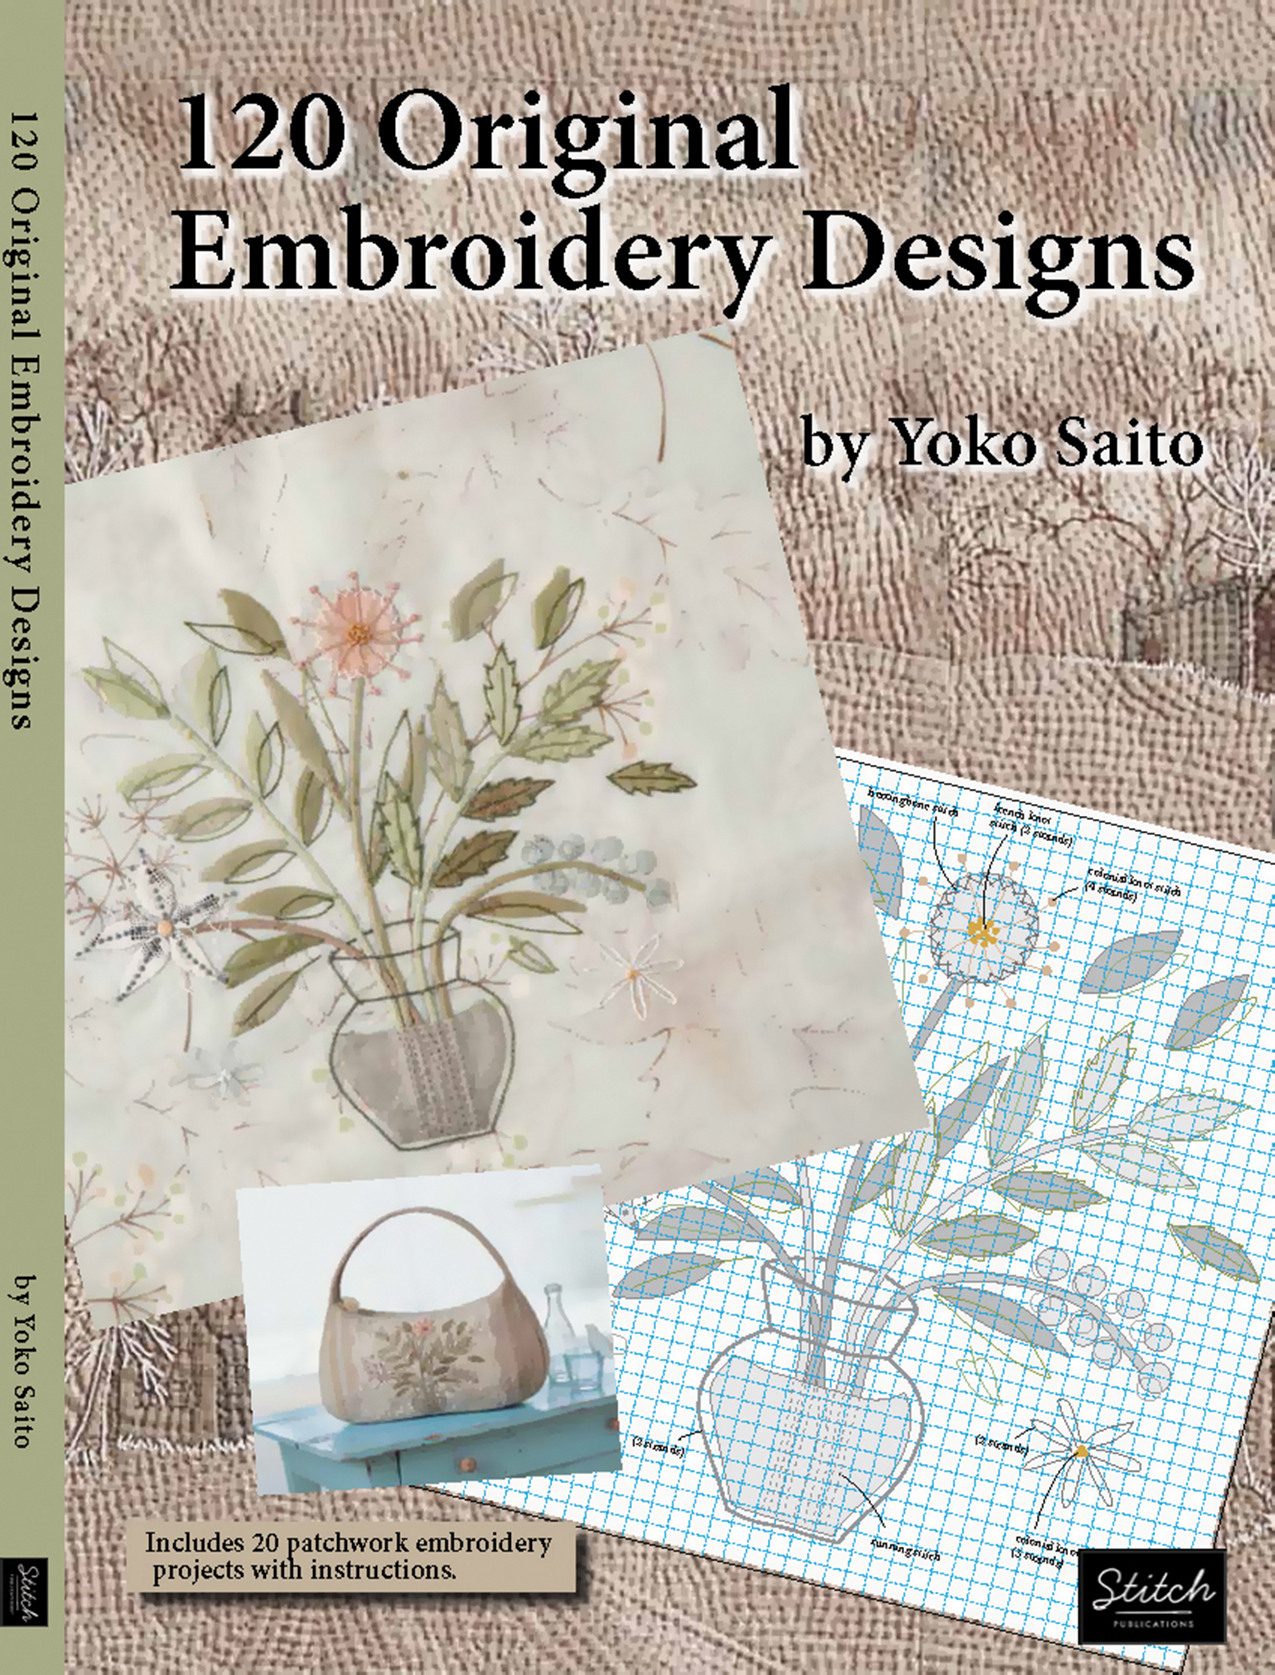 English Embroidery Patterns 120 Original Embroidery Designs Checker News Blog